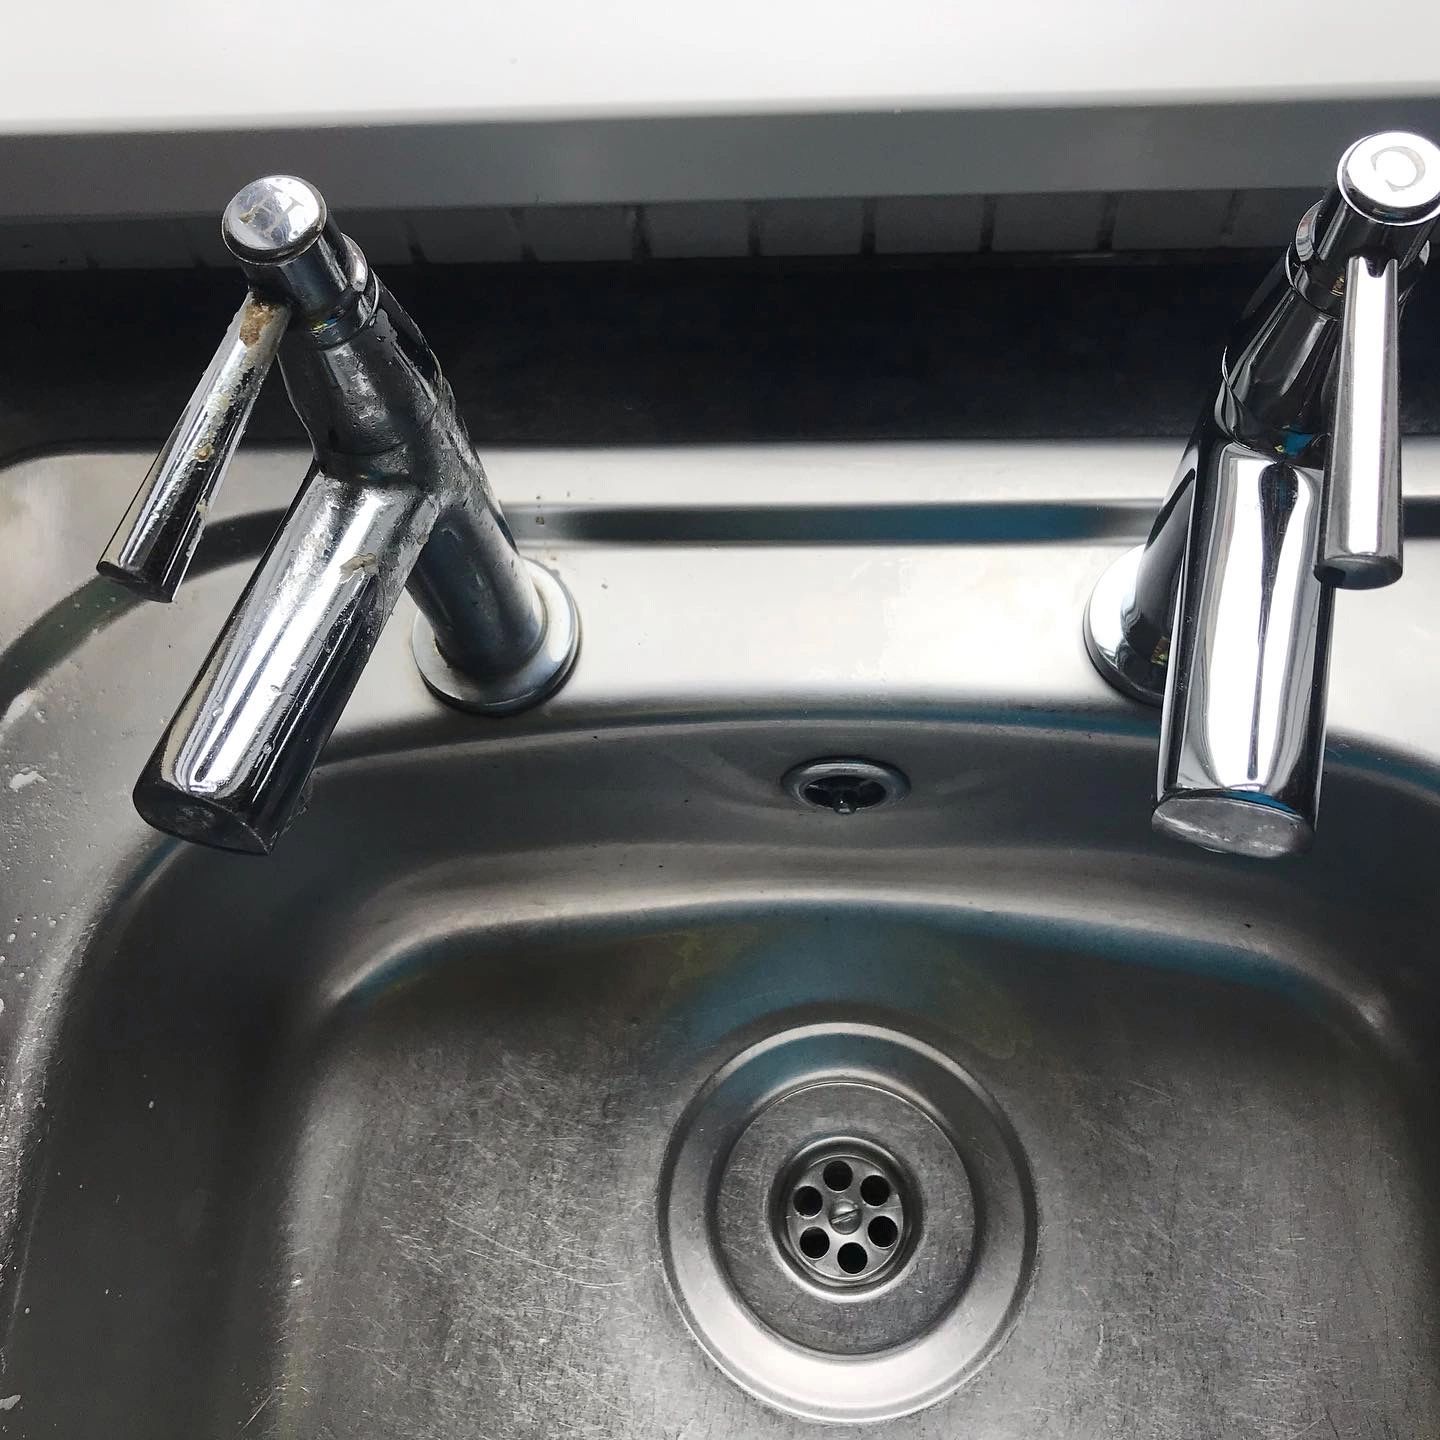 Dirty and Clean Sink taps